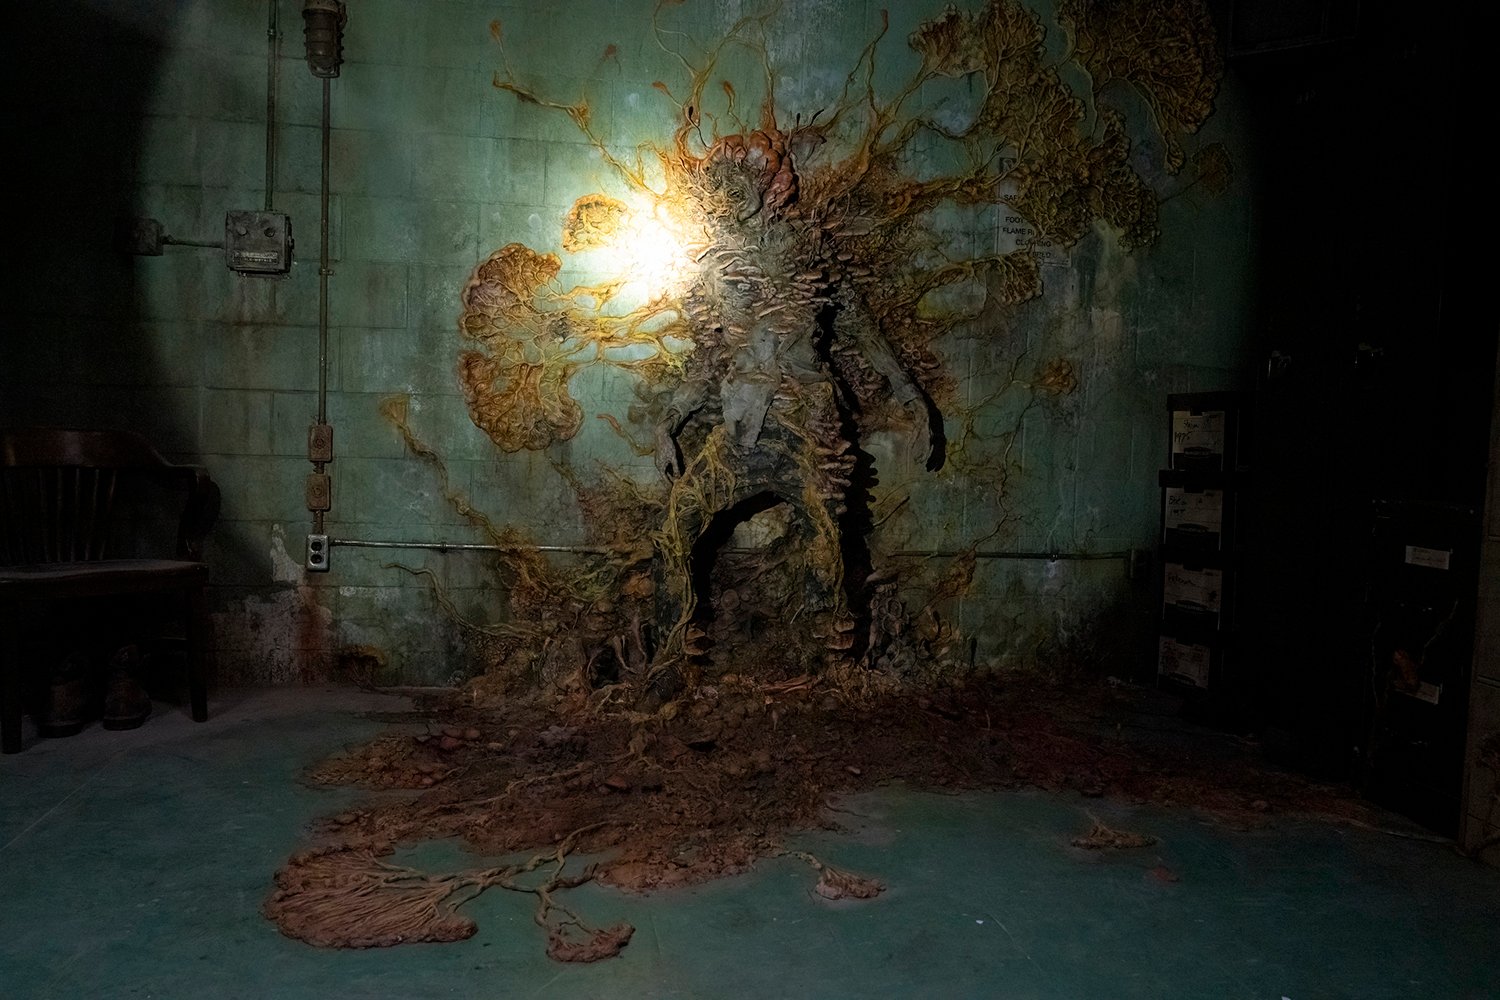 The Cordyceps fungus grows around a person attached to a wall in The Last of Us